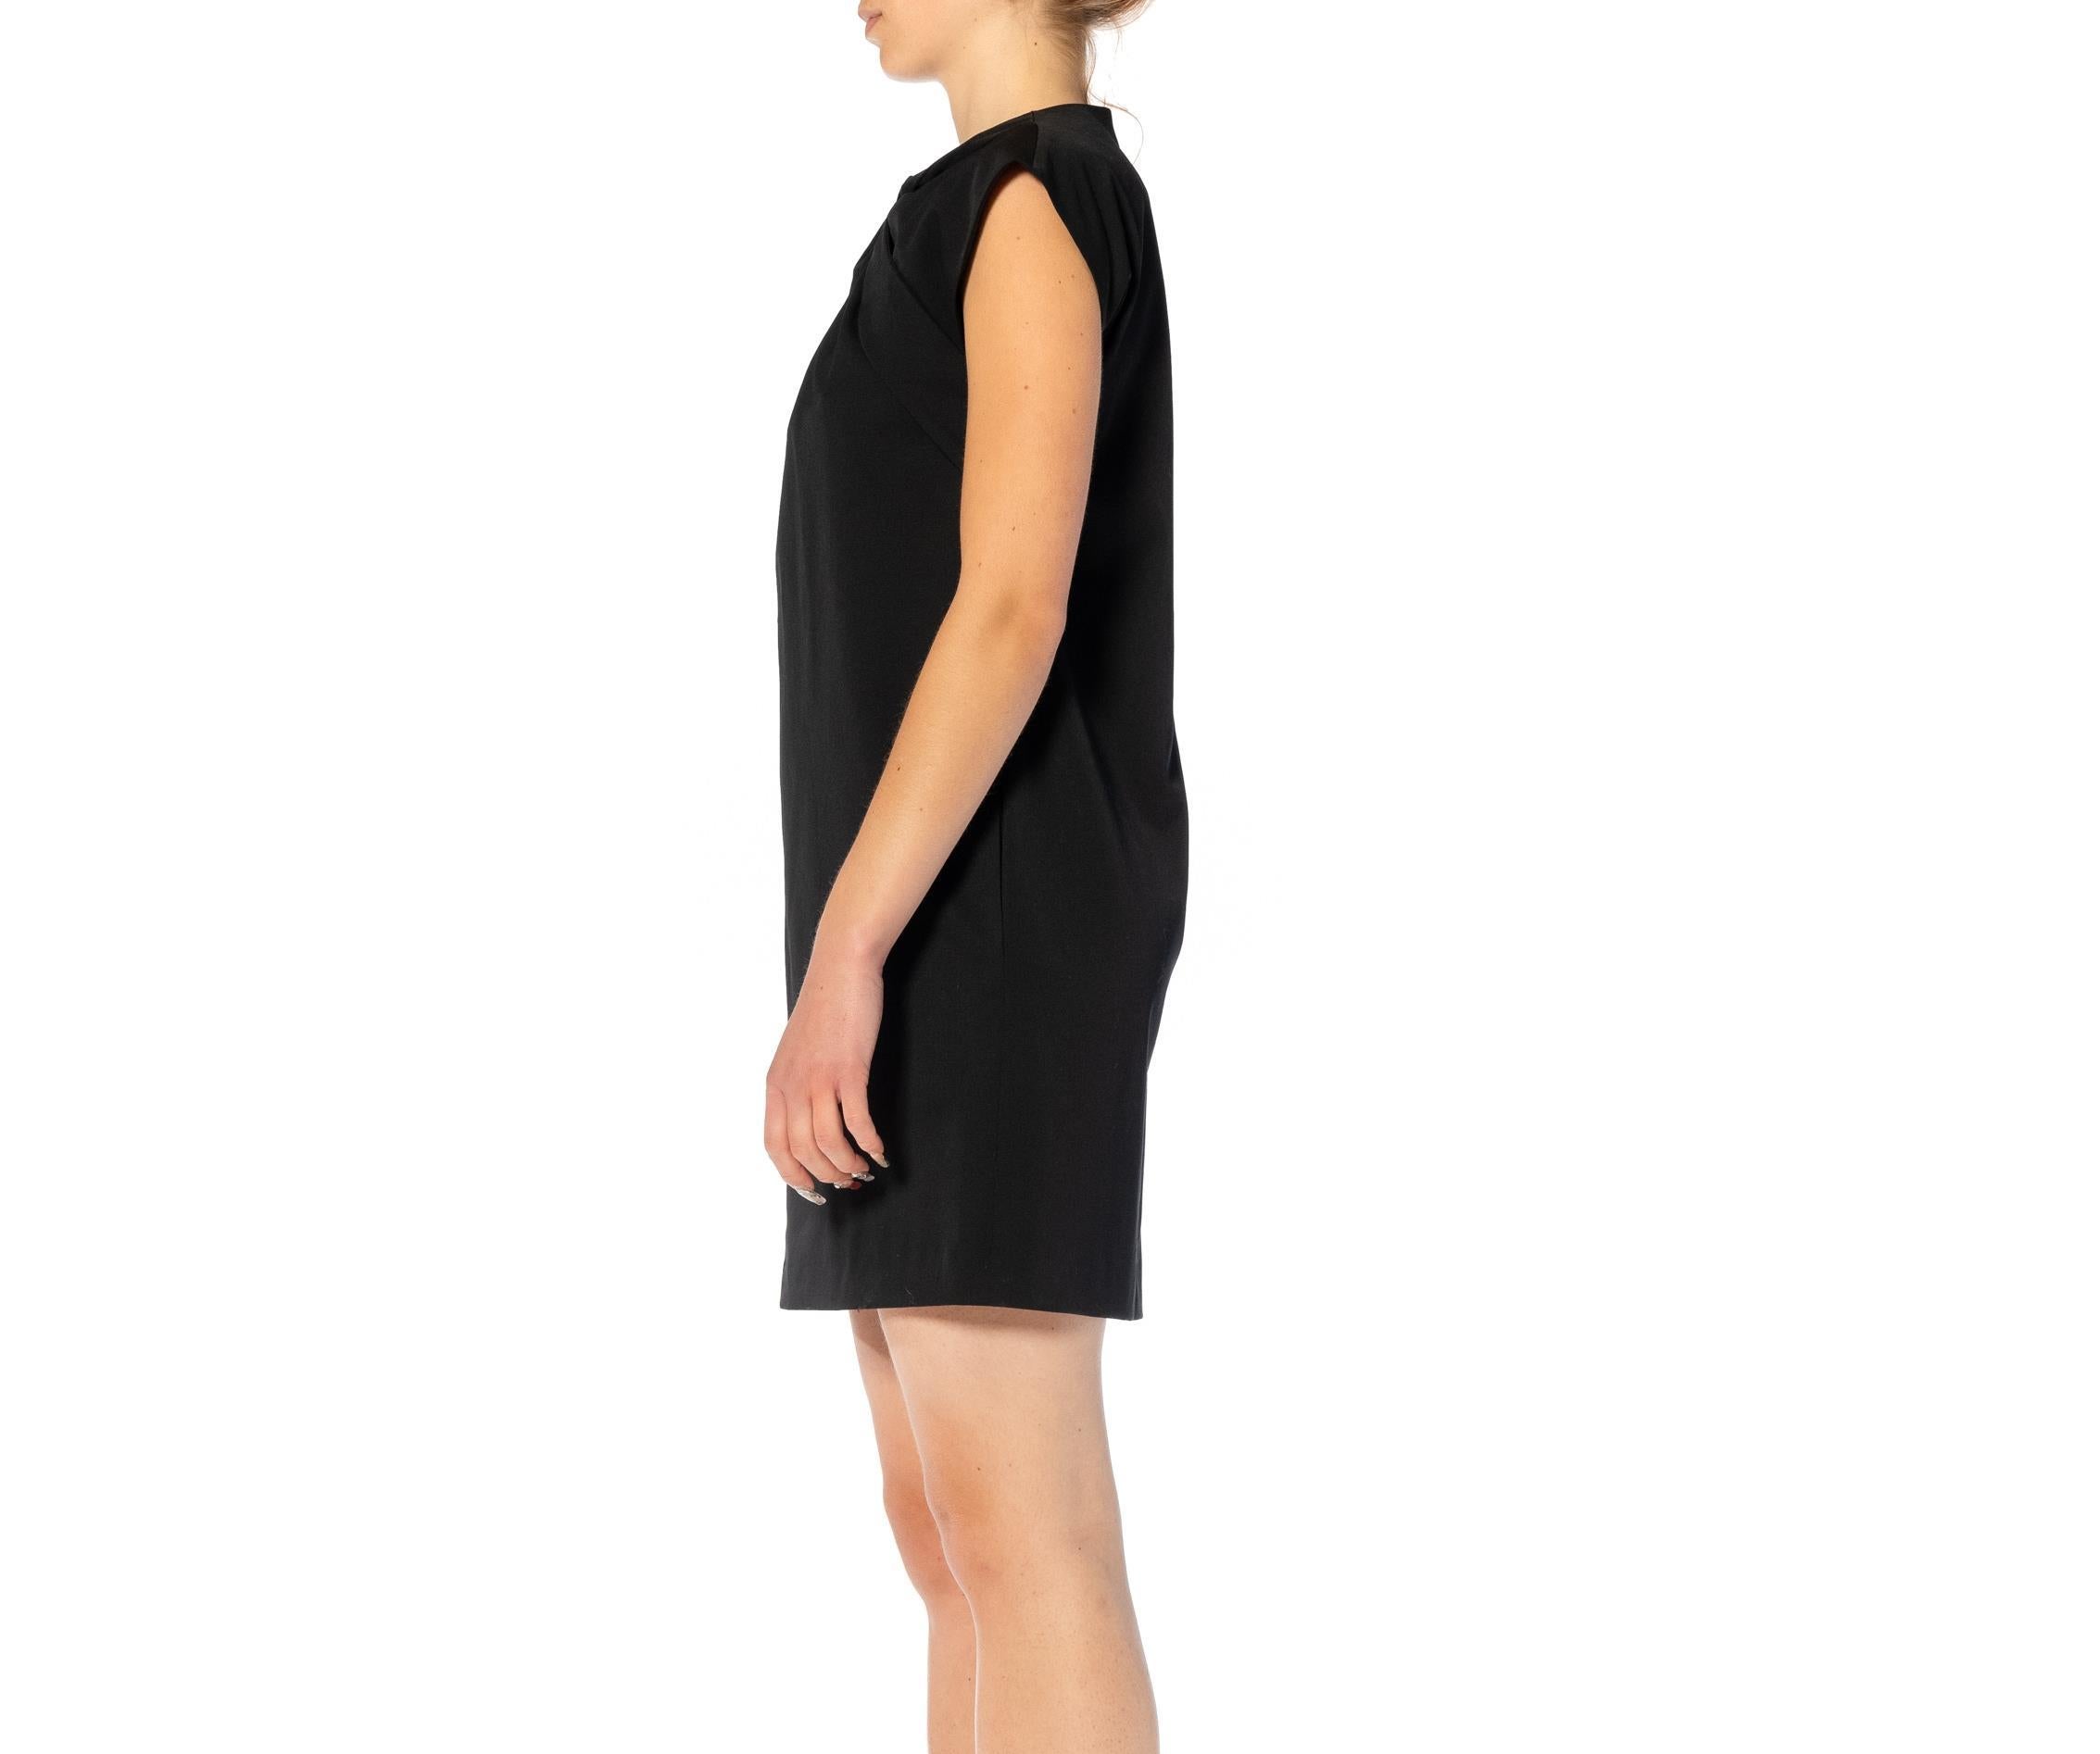 2000S GUCCI Black Wool Sleeveless Cocktail Dress With Asymmetrical Gathered Nec In Excellent Condition For Sale In New York, NY